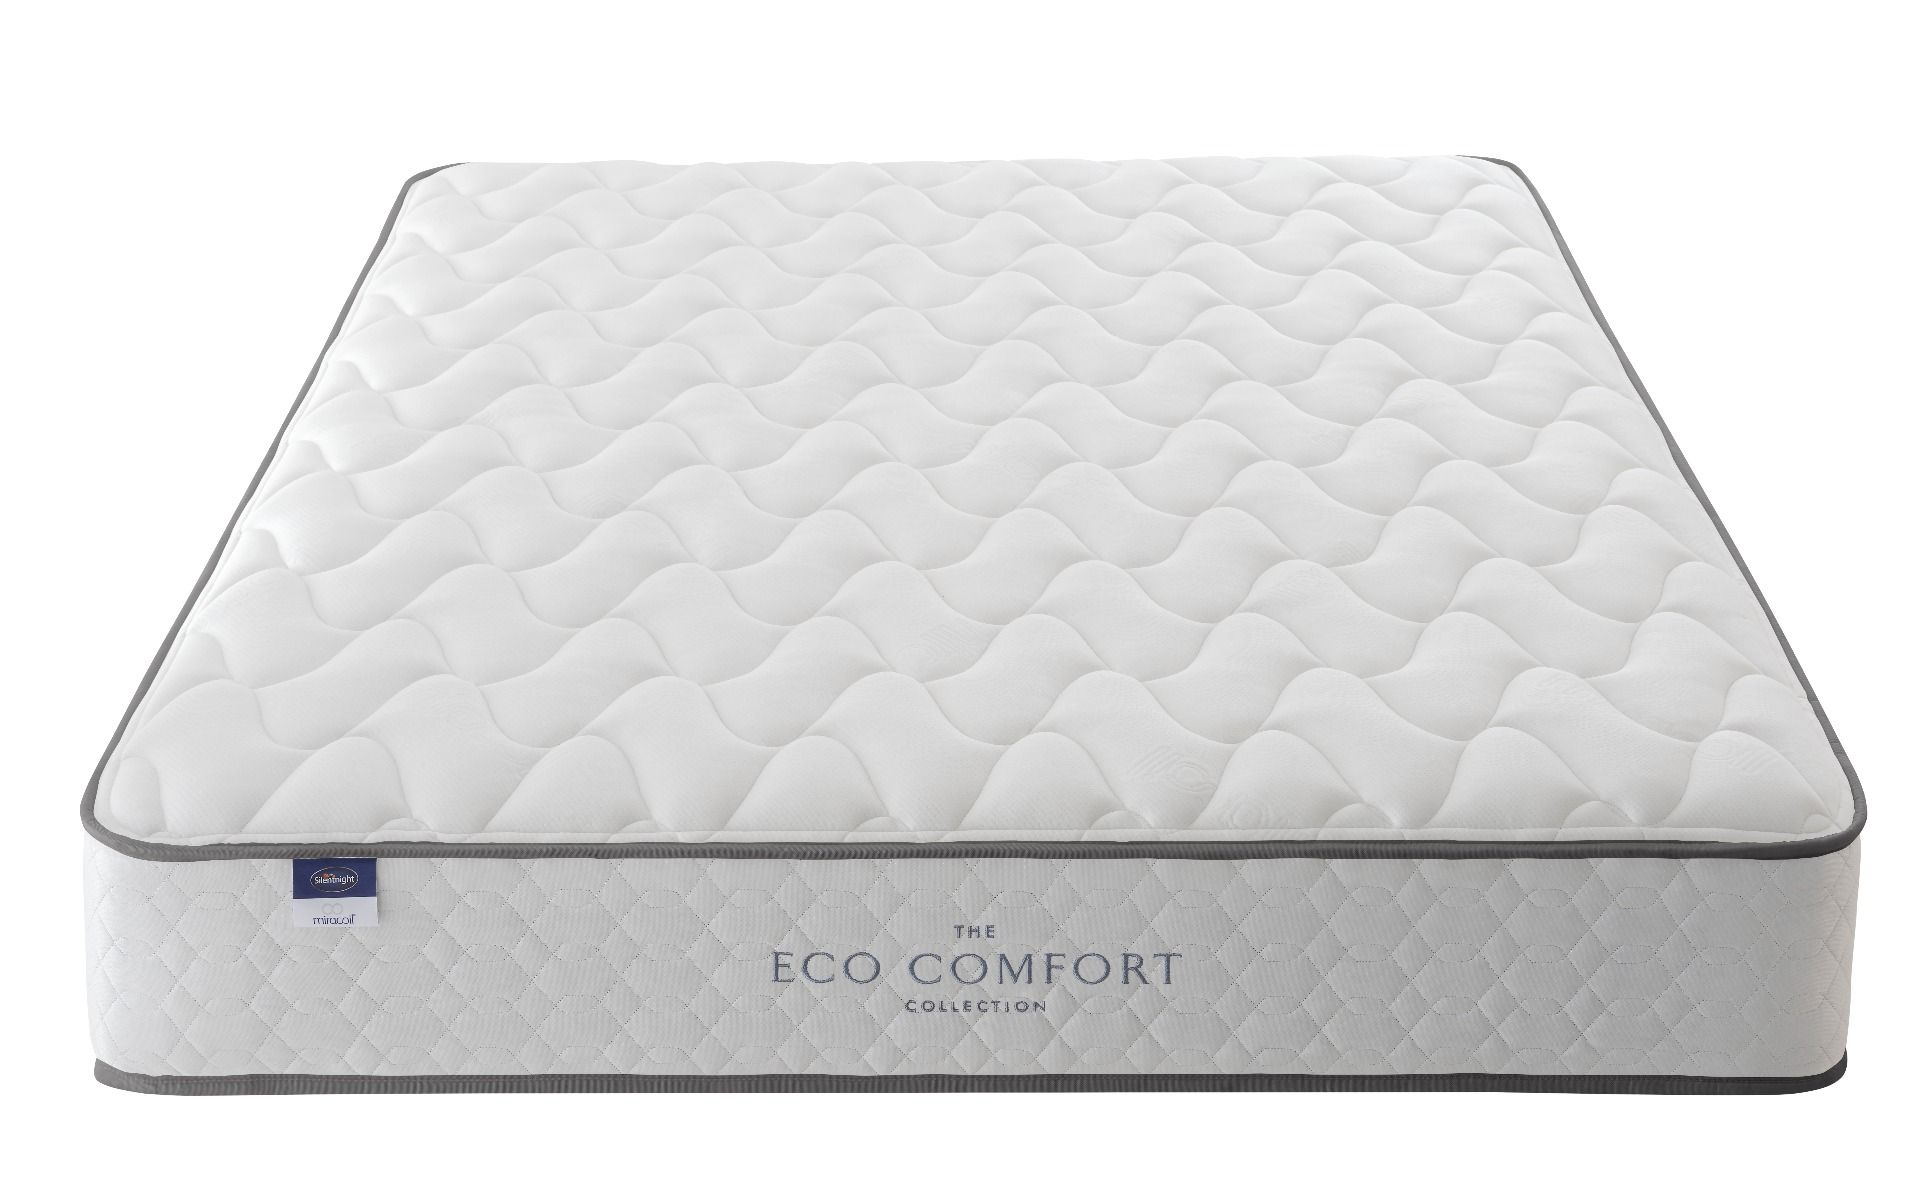 The Eco Comfort Collection